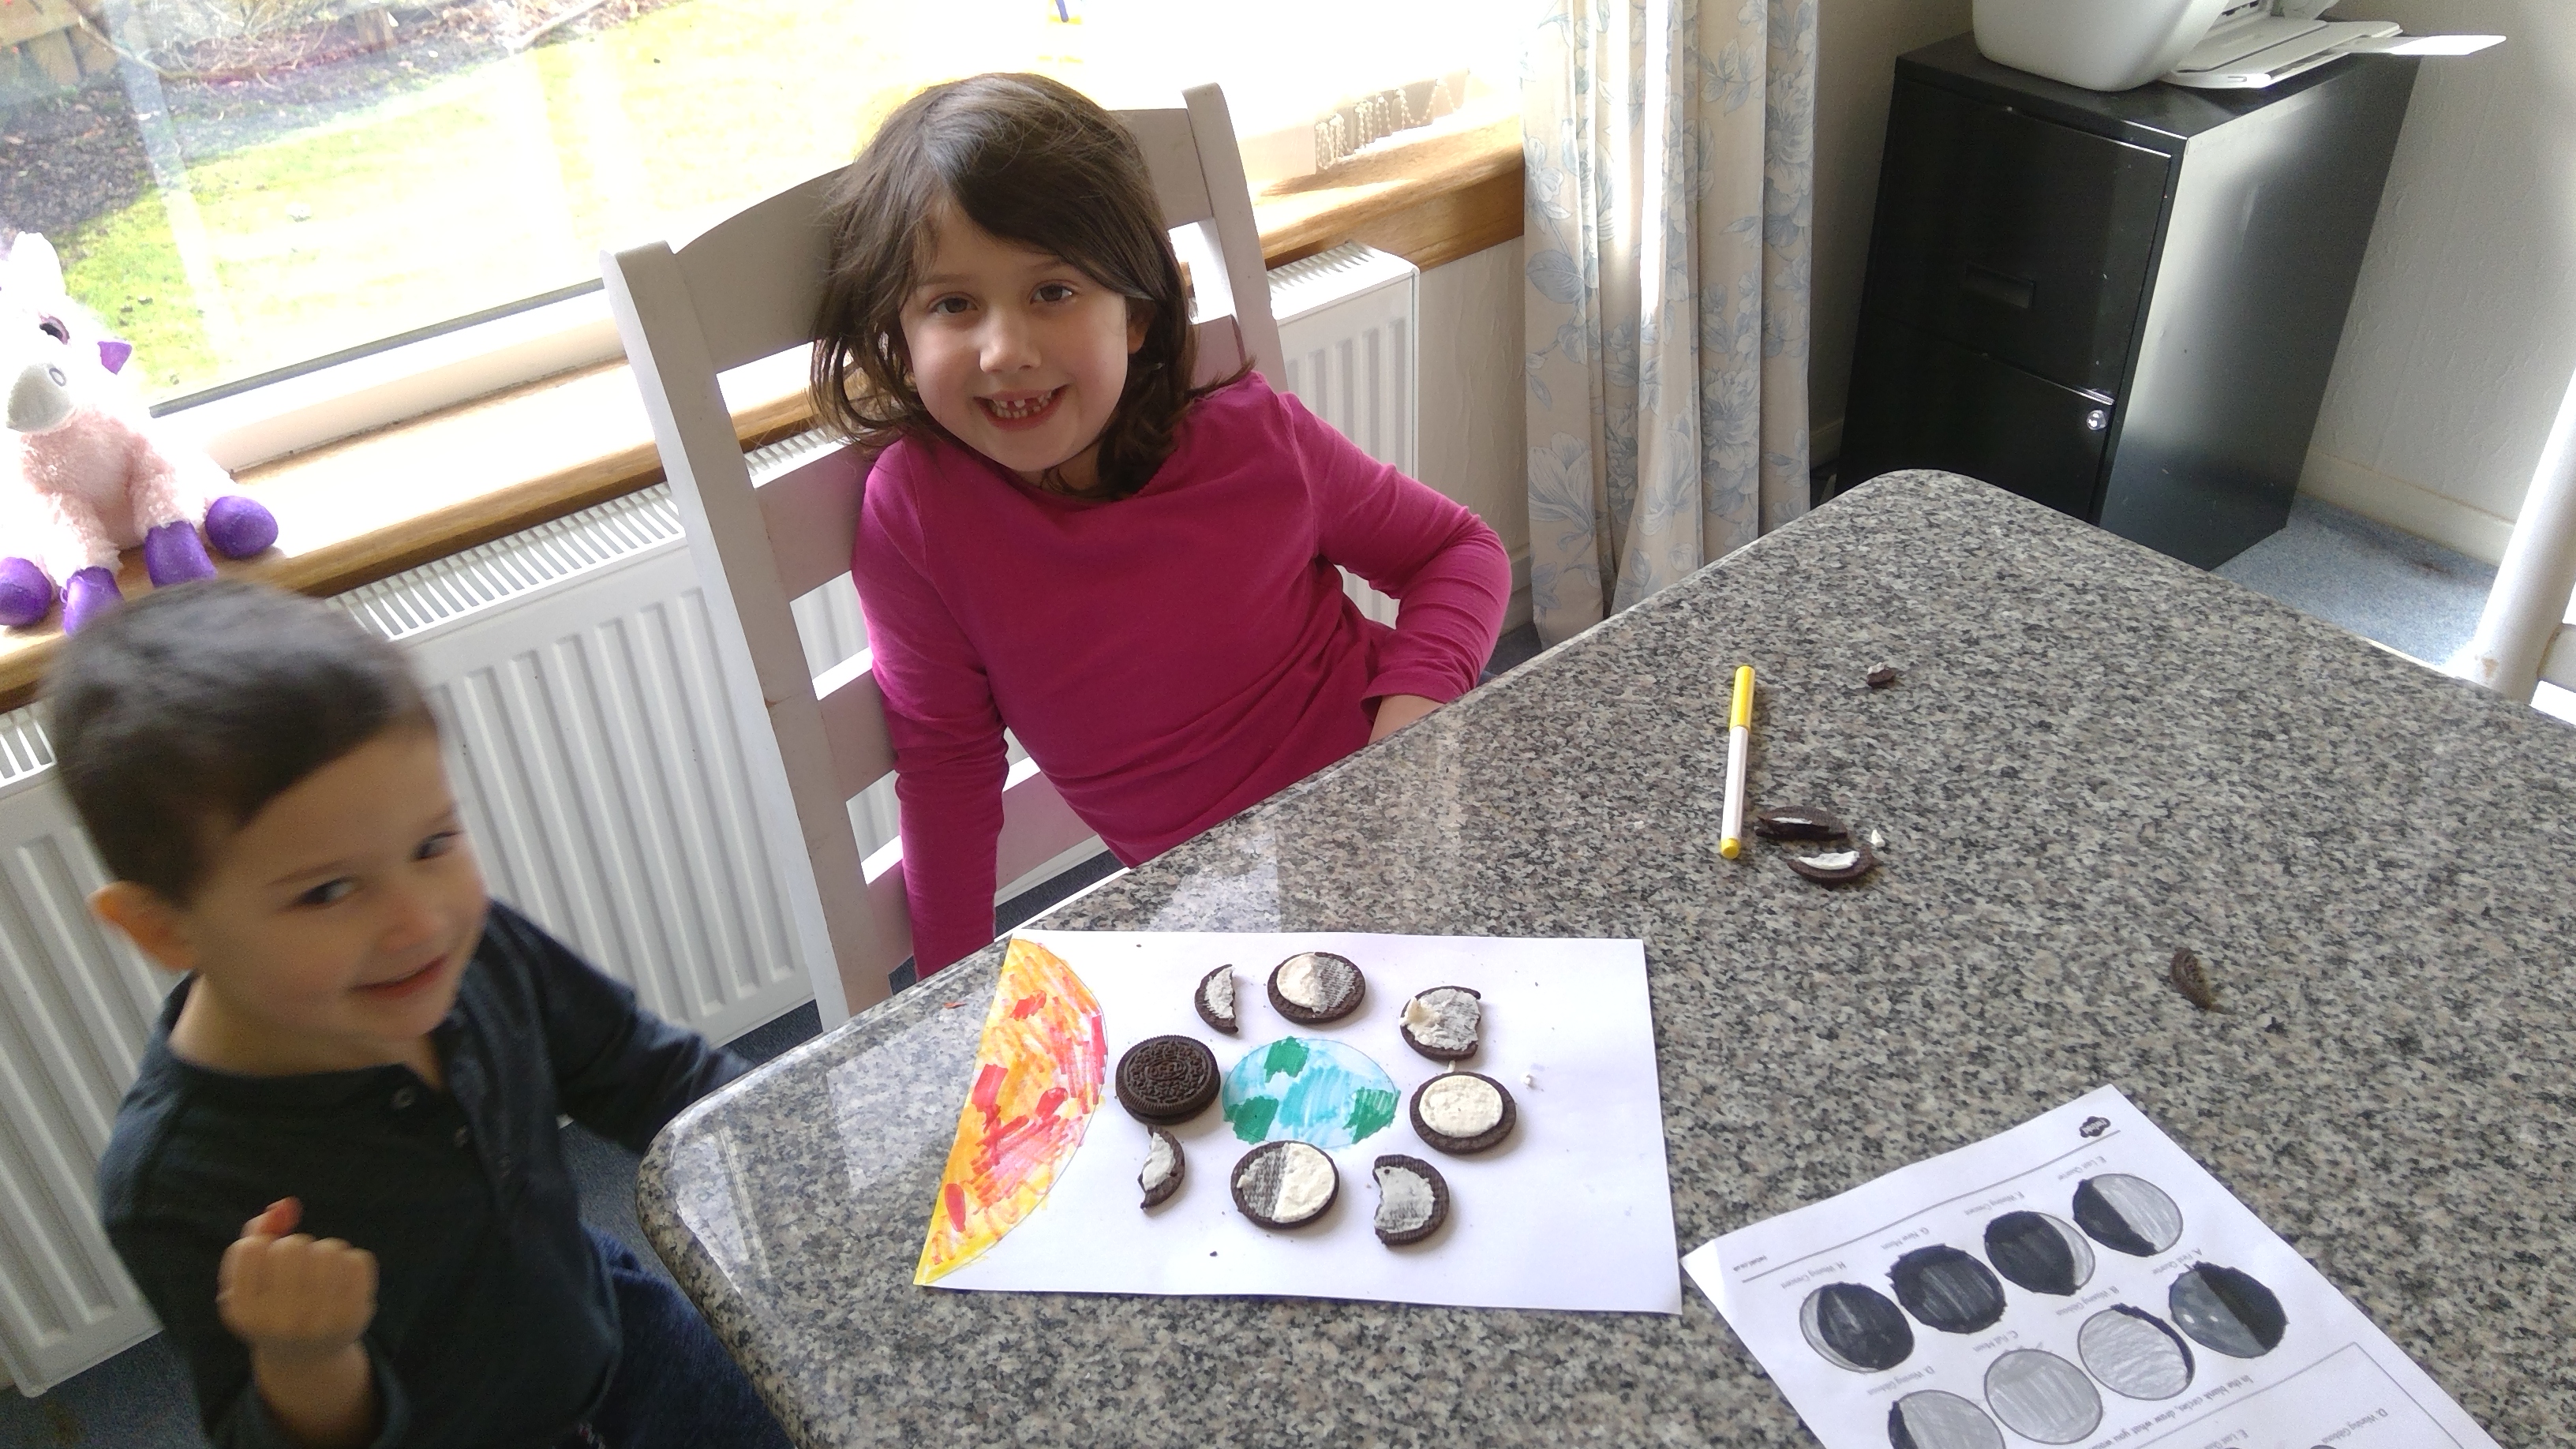 Madison and her brother using oreo biscuits to show the phases of the moon